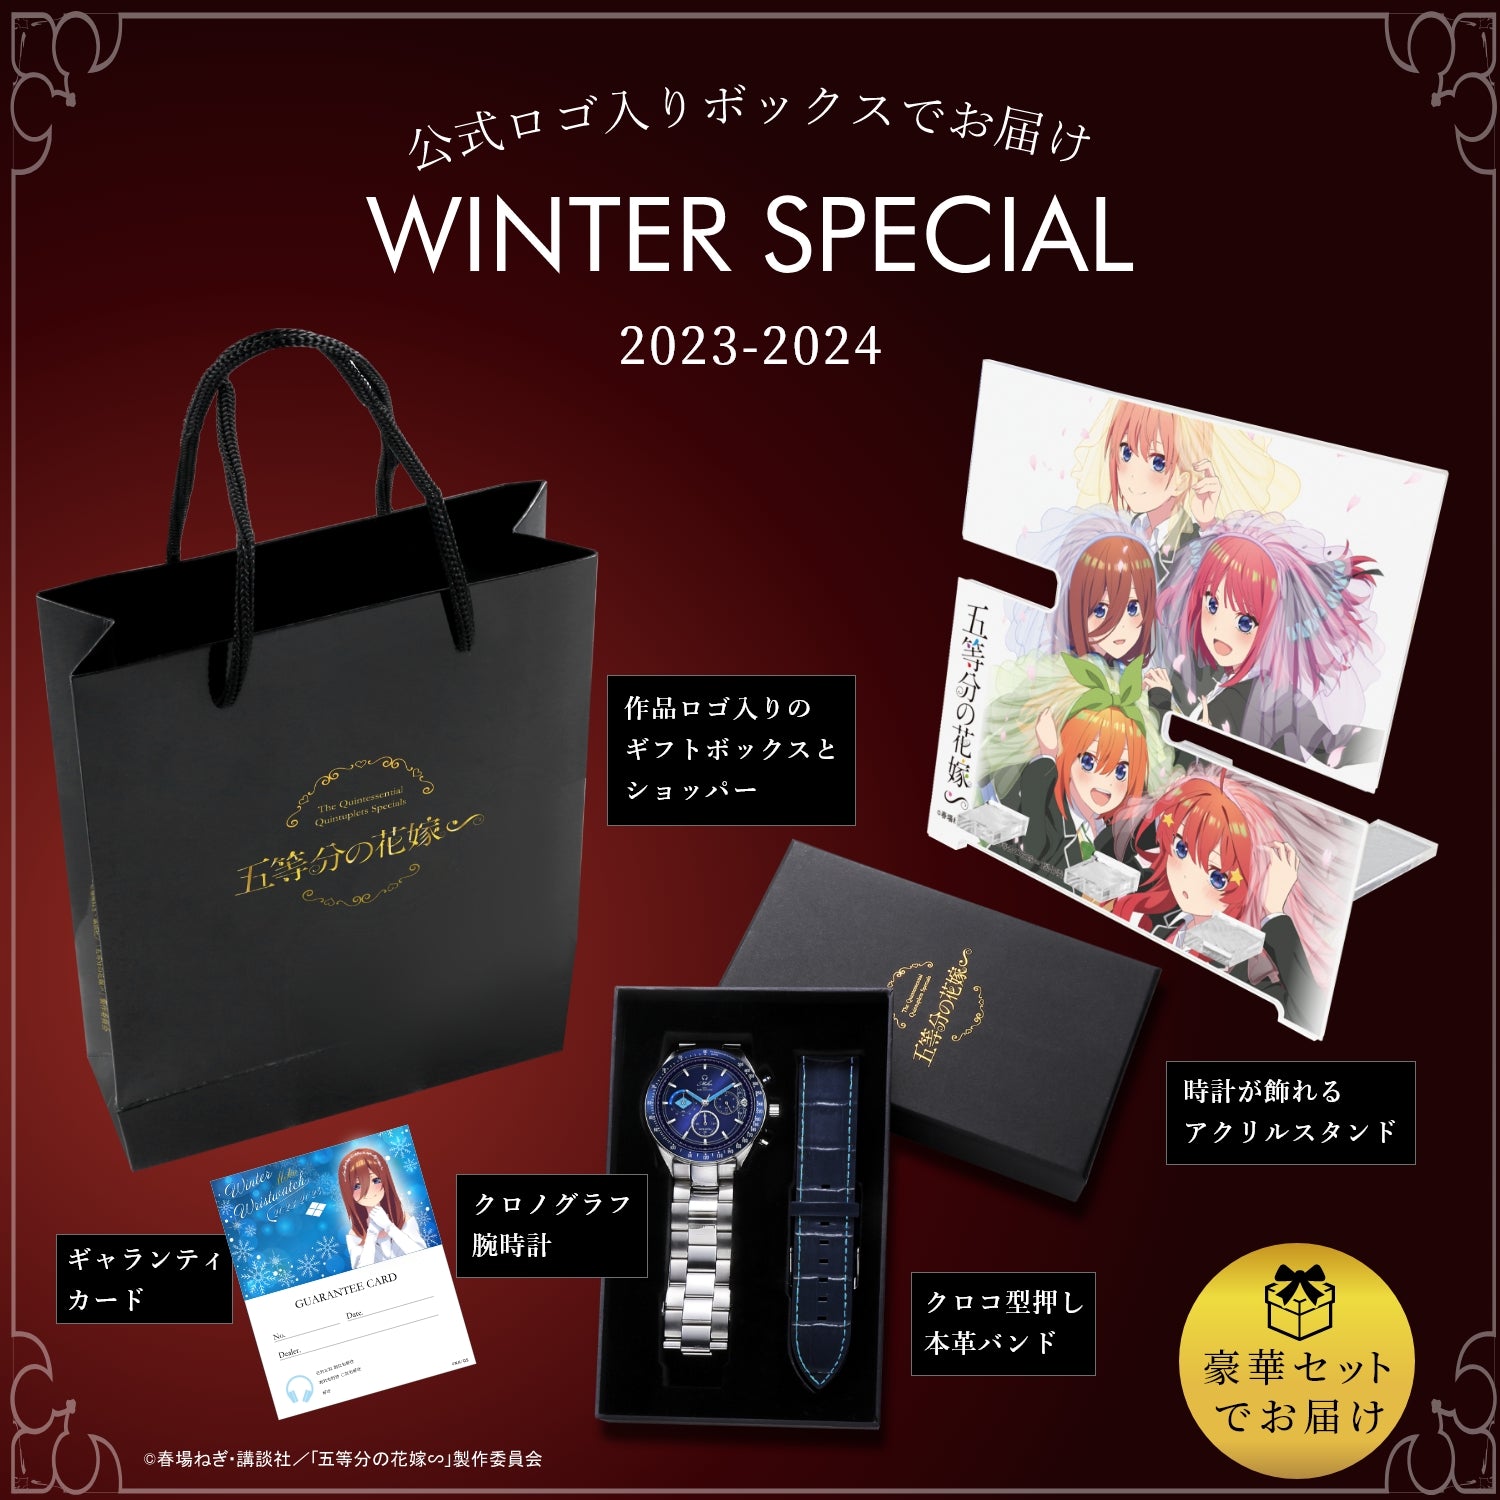 TV special anime“The Quintessential Quintuplets” Radio Solar Chronograph Winter Special model Change belt Included | Miku Nakano